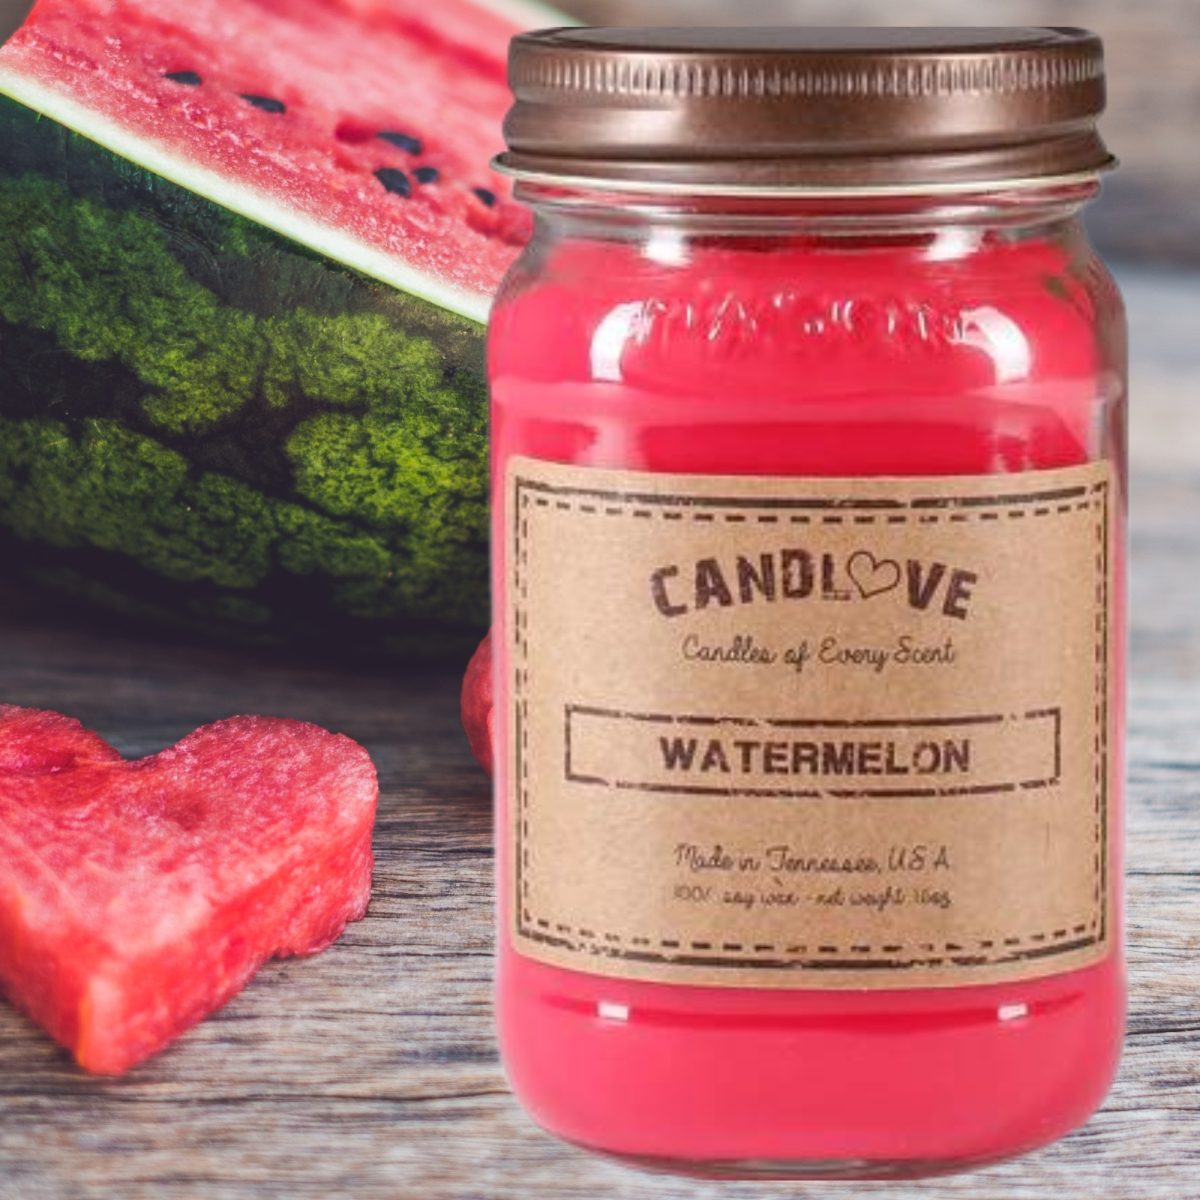 Picture of PPI SUPPLIES Watermelon-C Candlove Watermelon Scented Candle - Non-Toxic 100% Soy Candle - Handmade & Hand Poured Long Burning Candle - Highly Scented All Natural Clean Burning Candle (16 OZ Mason Jar) Made in The USA